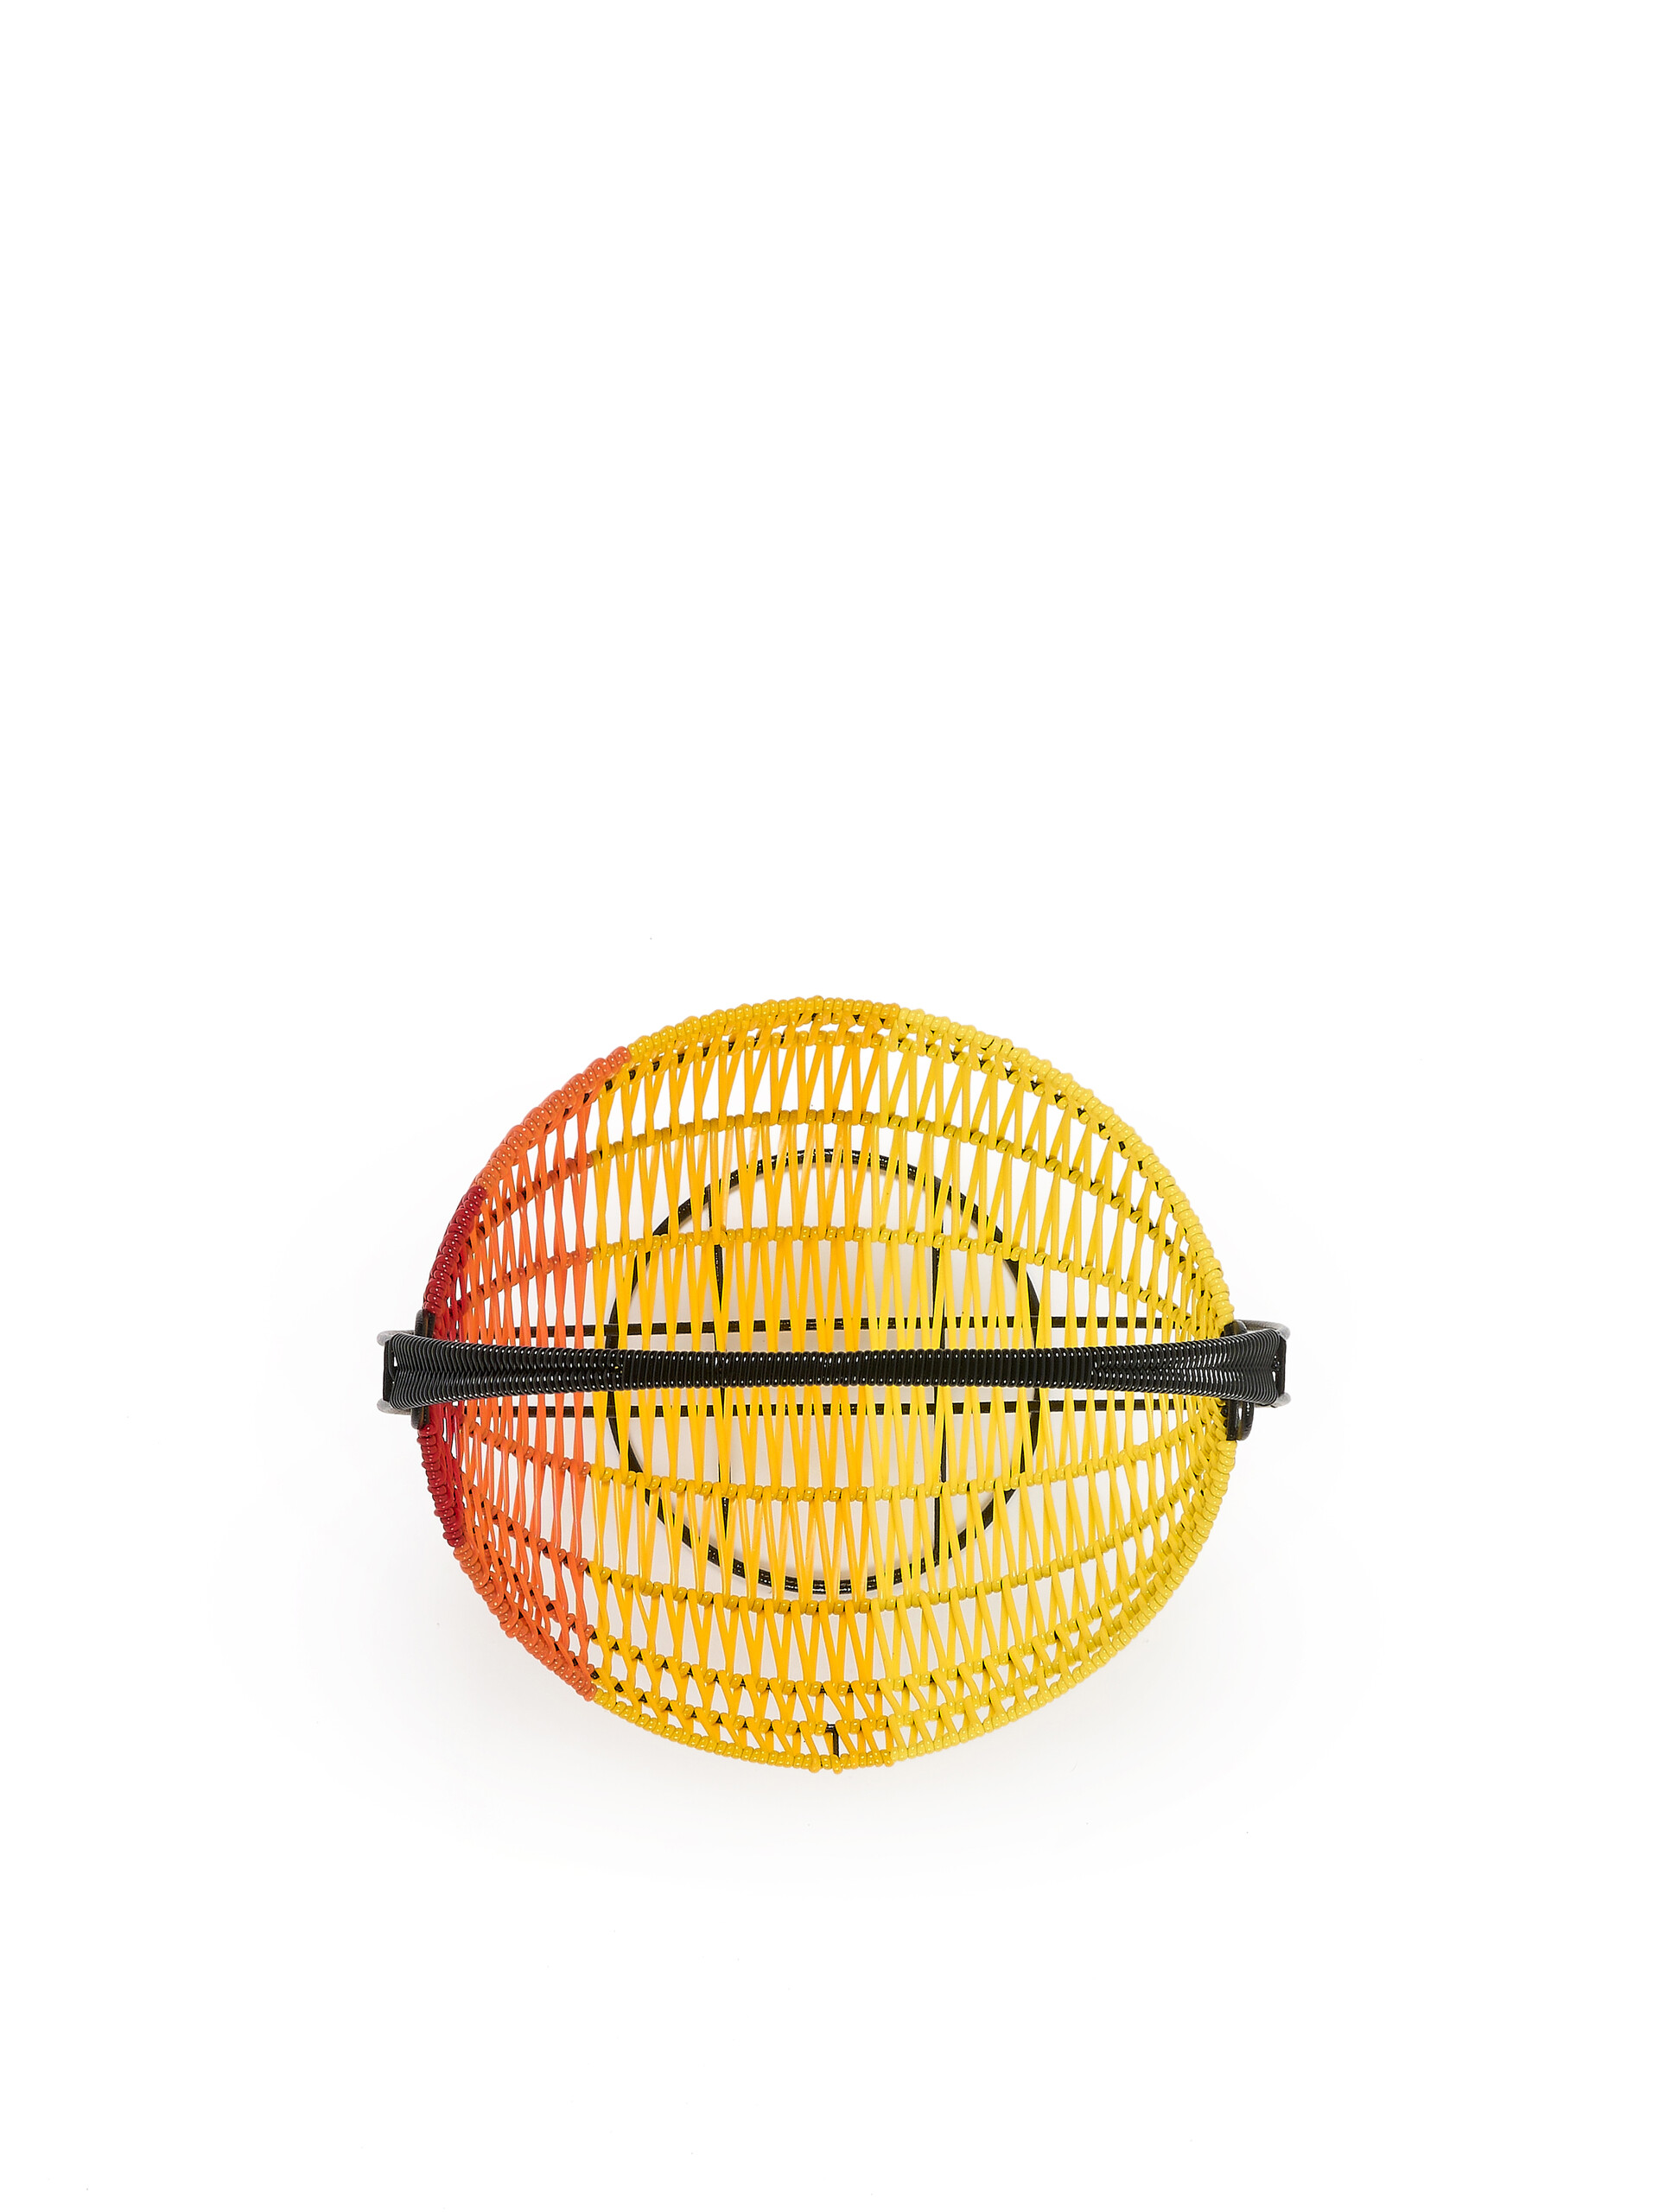 Yellow and red MARNI MARKET woven cable fruit basket - Accessories - Image 4